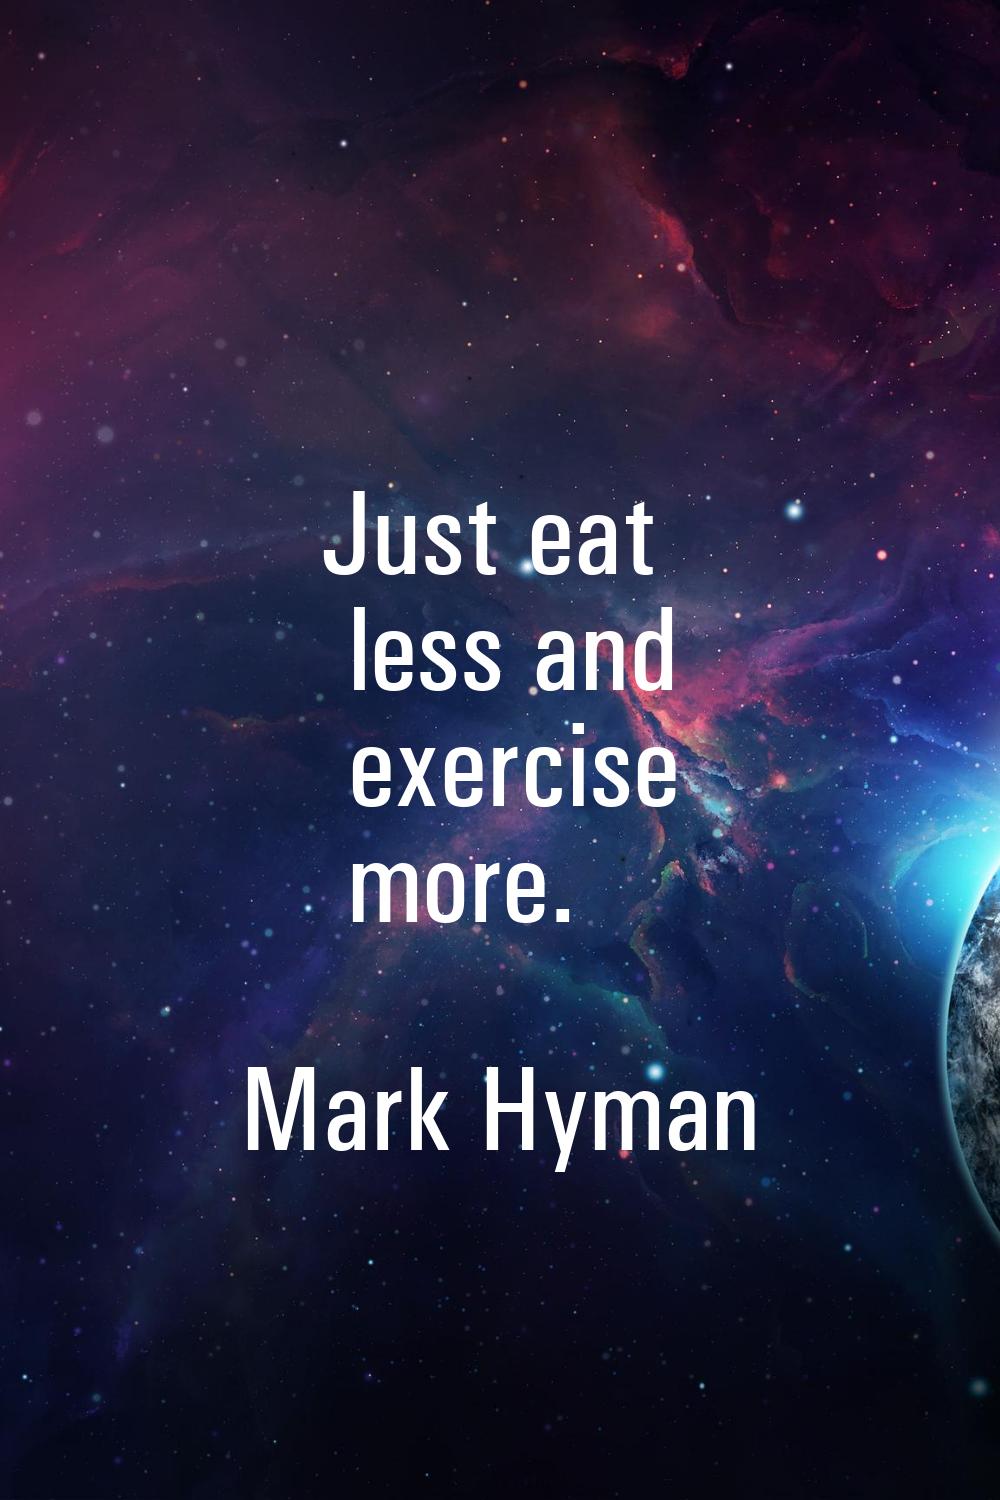 Just eat less and exercise more.